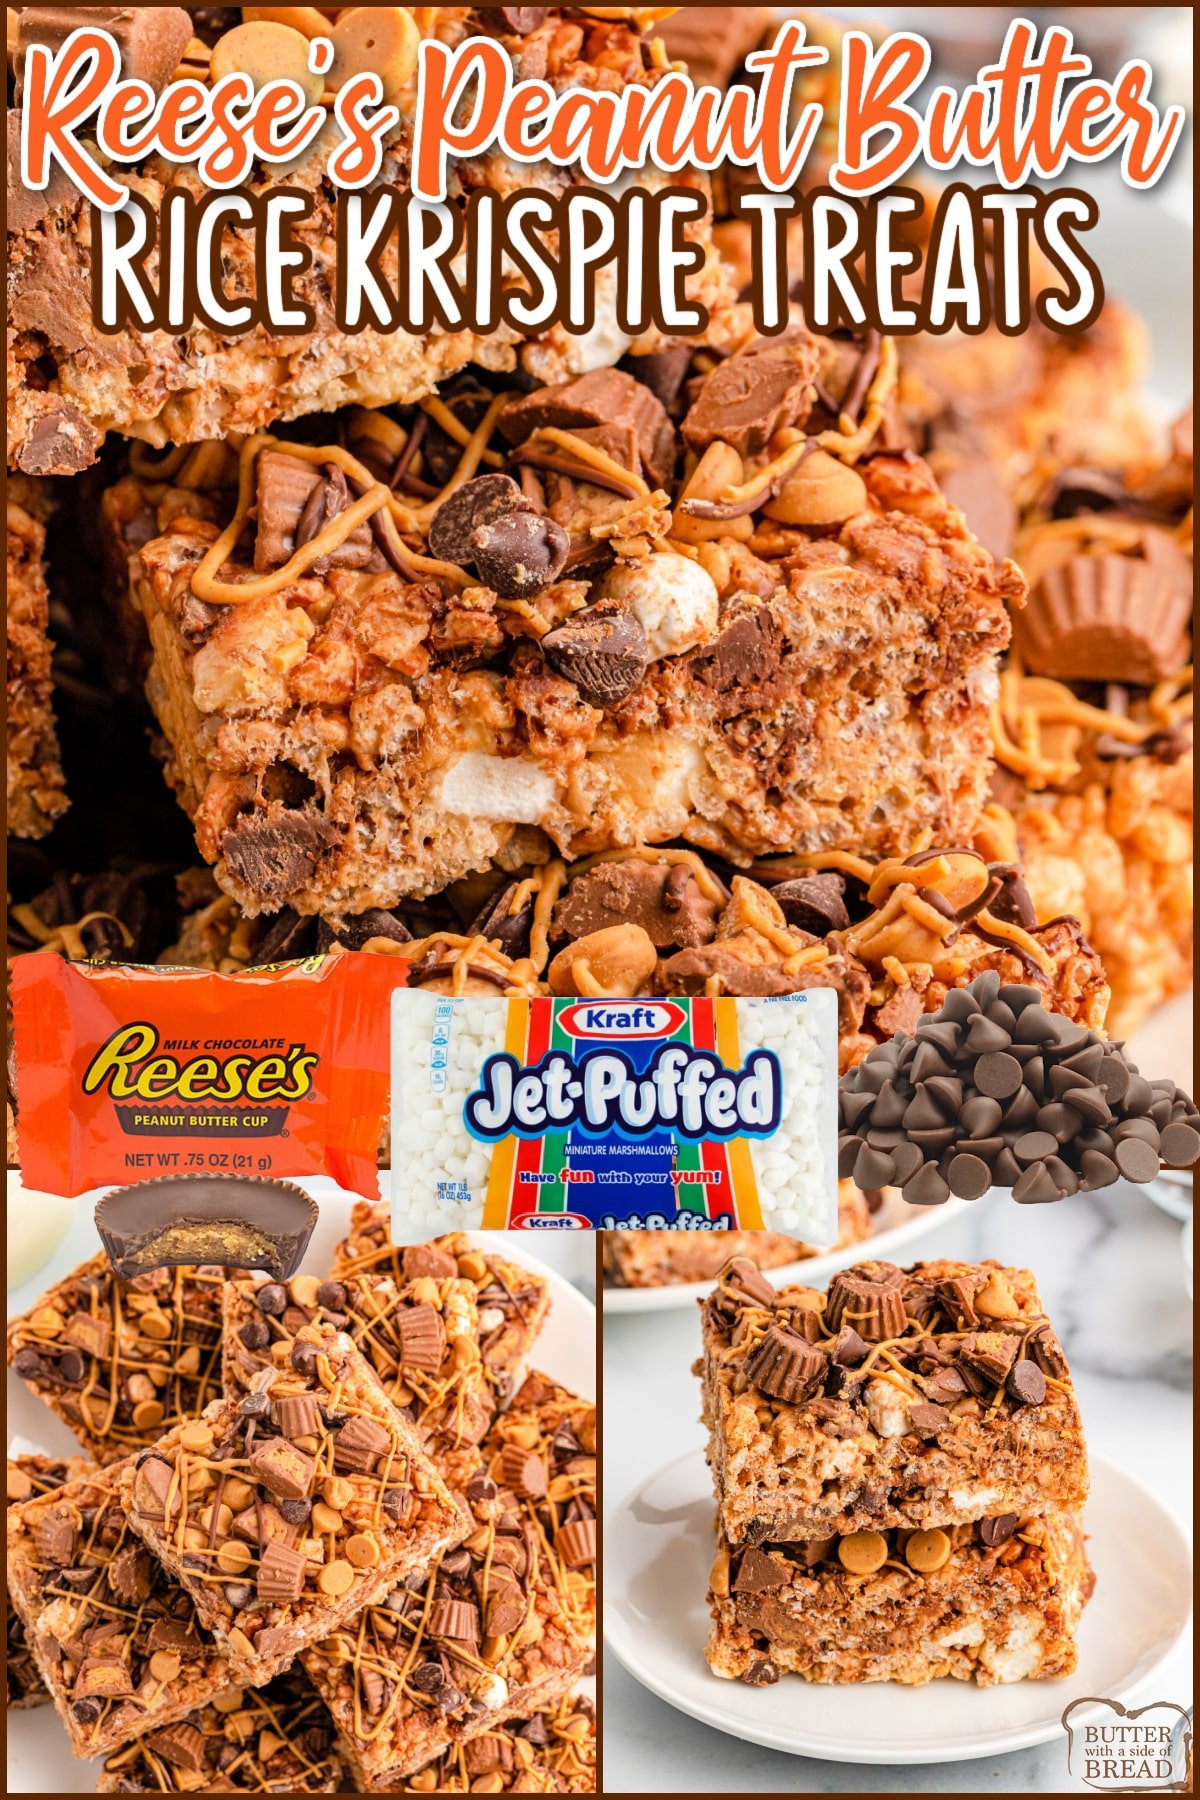 Reese's Rice Krispie Treats are loaded with mini Reese’s peanut butter cups, peanut butter chips, and semisweet chocolate chips. Simple rice krispie treat recipe packed with chocolate and peanut butter!